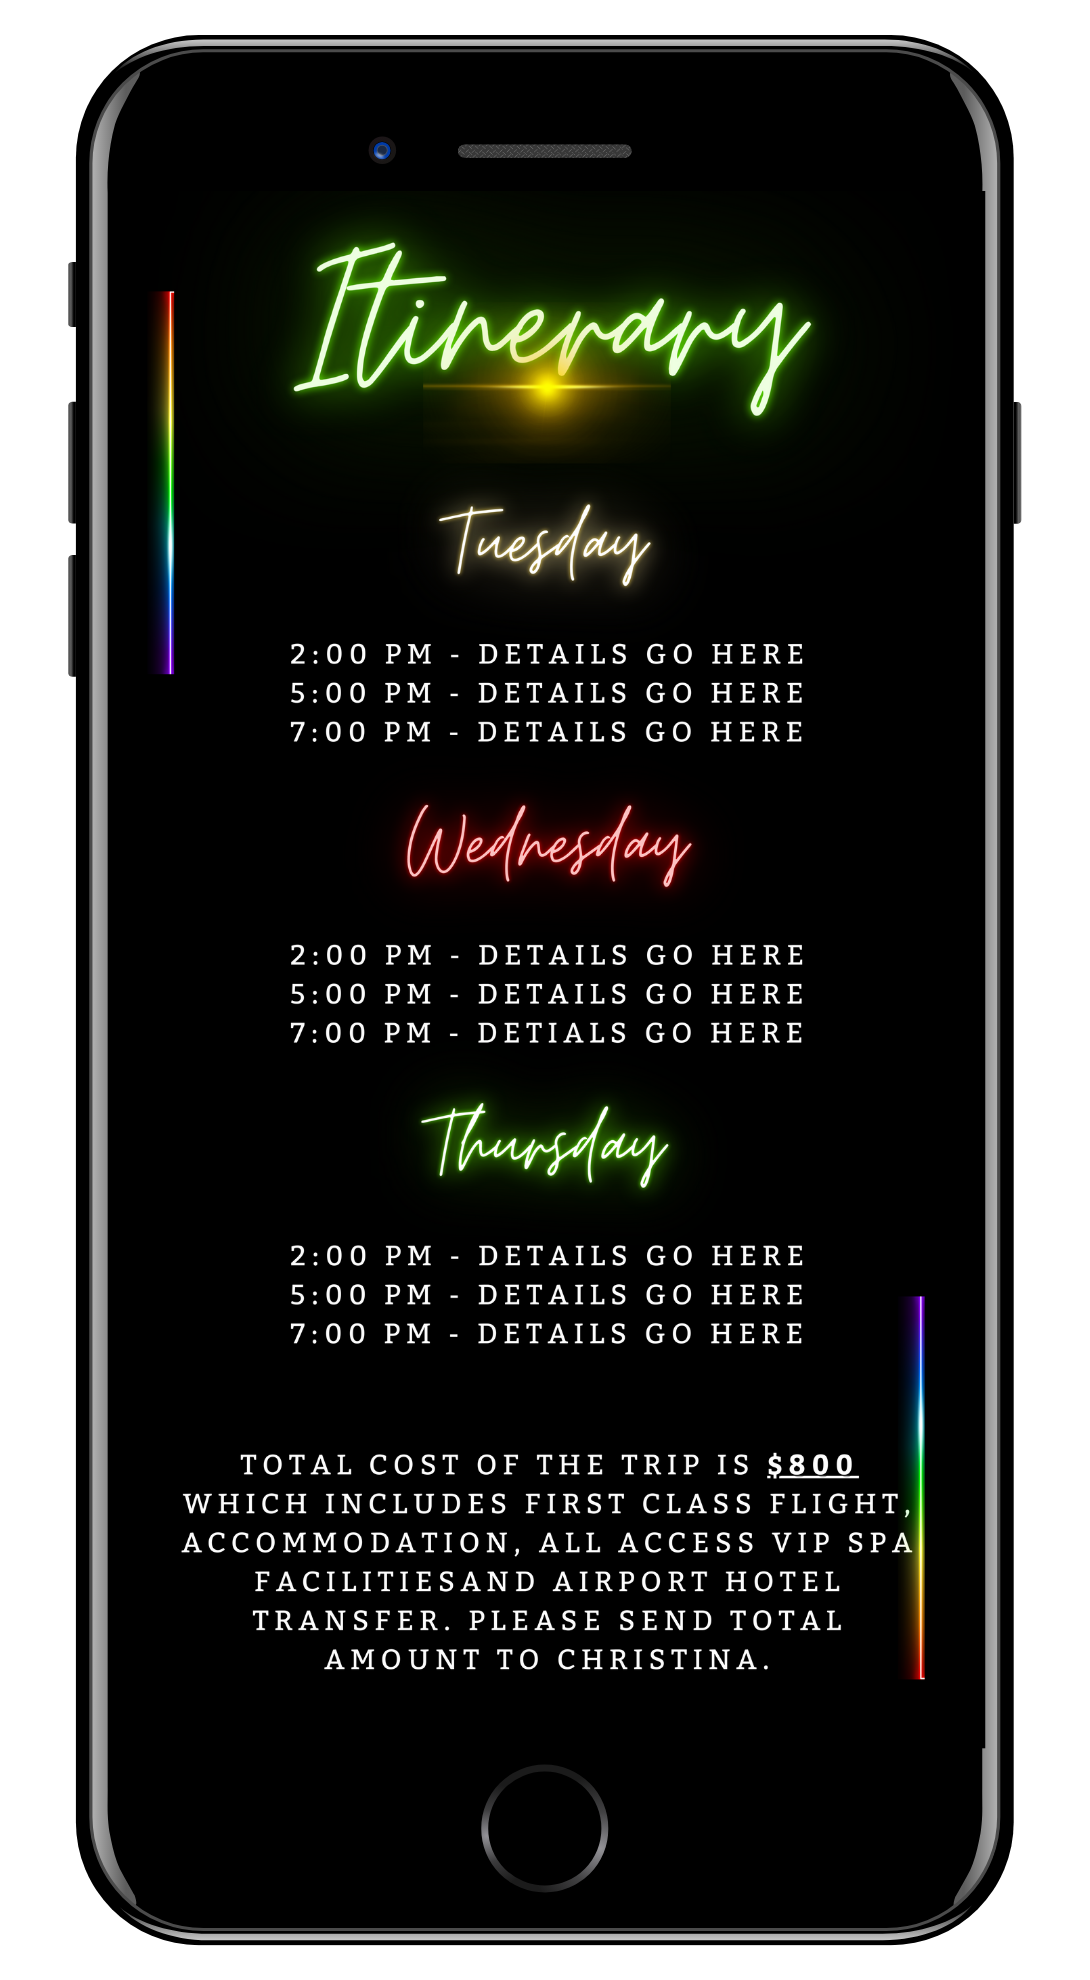 Jamaica Colourful Neon Getaway Party Evite displayed on a smartphone screen, featuring customizable text and neon elements for a vibrant digital invitation.